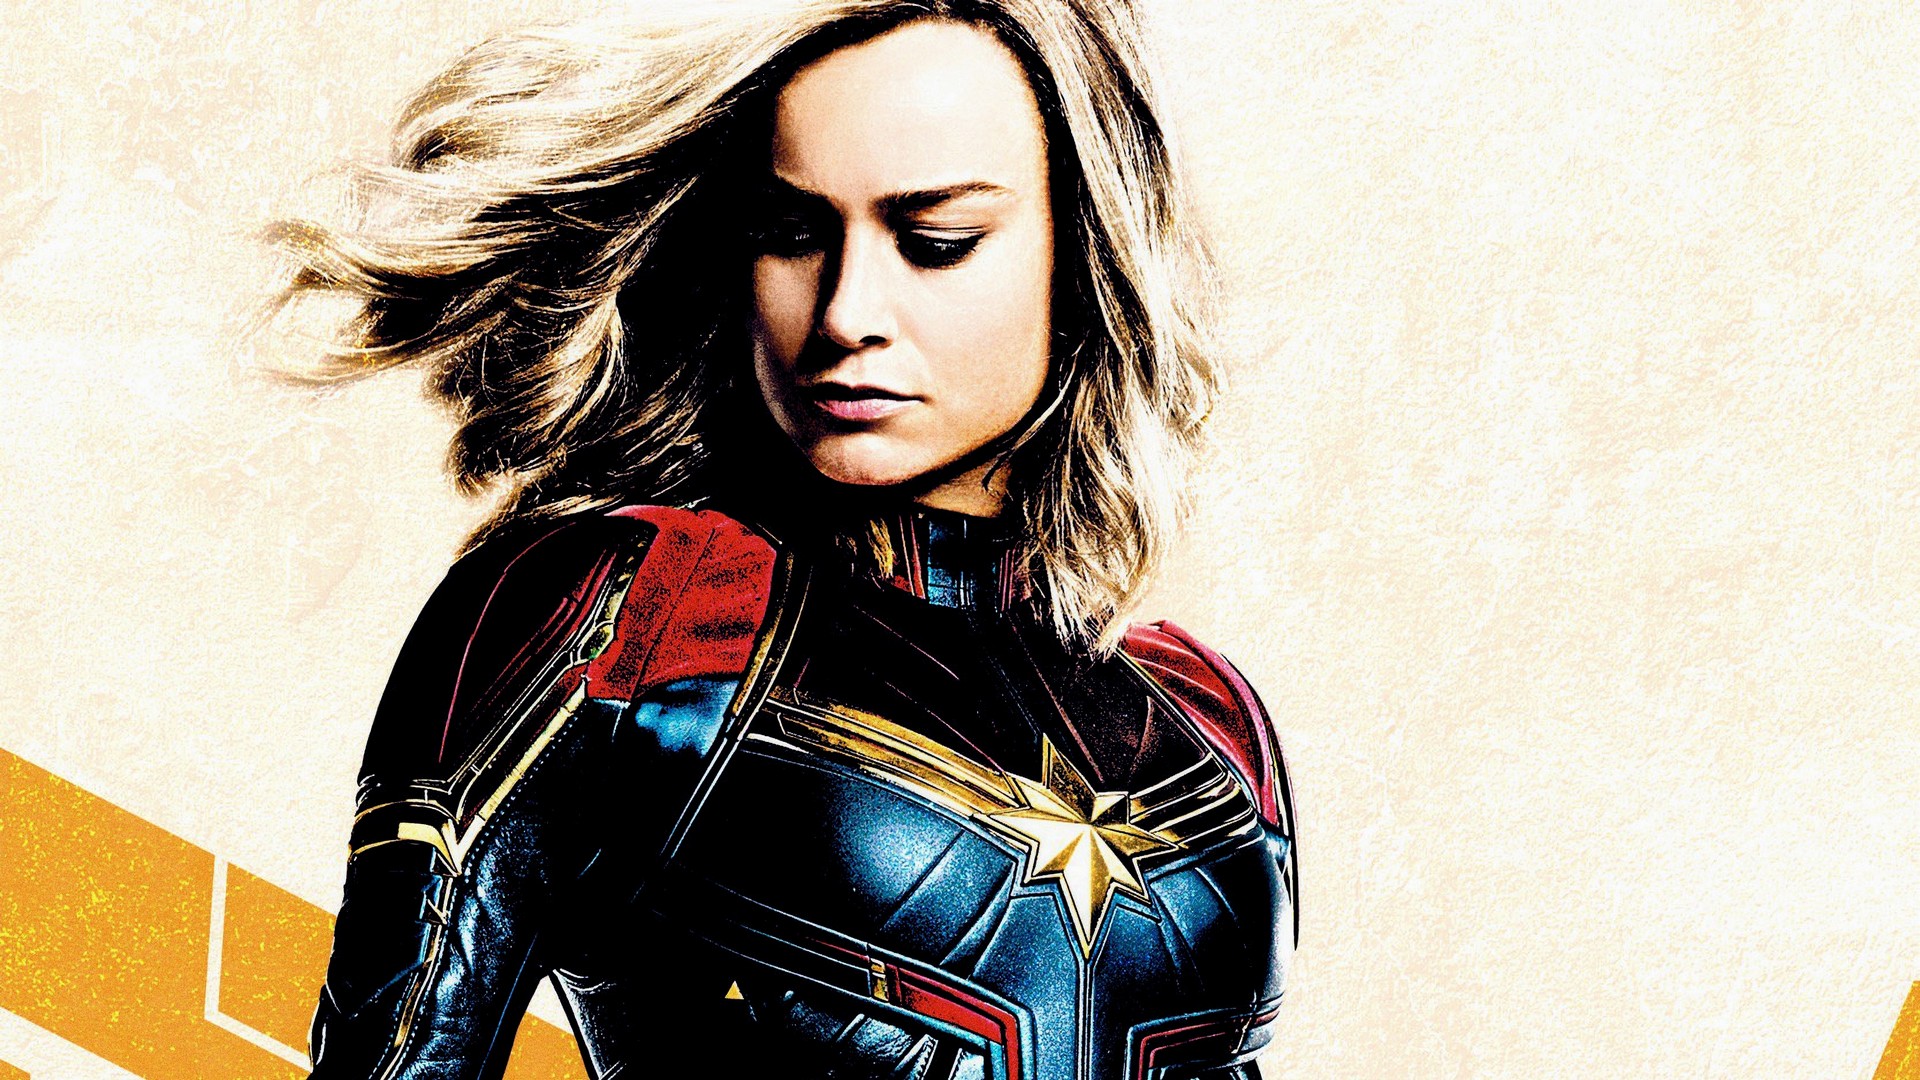 Wallpapers Computer Captain Marvel With high-resolution 1920X1080 pixel. You can use this wallpaper for your Desktop Computer Backgrounds, Mac Wallpapers, Android Lock screen or iPhone Screensavers and another smartphone device